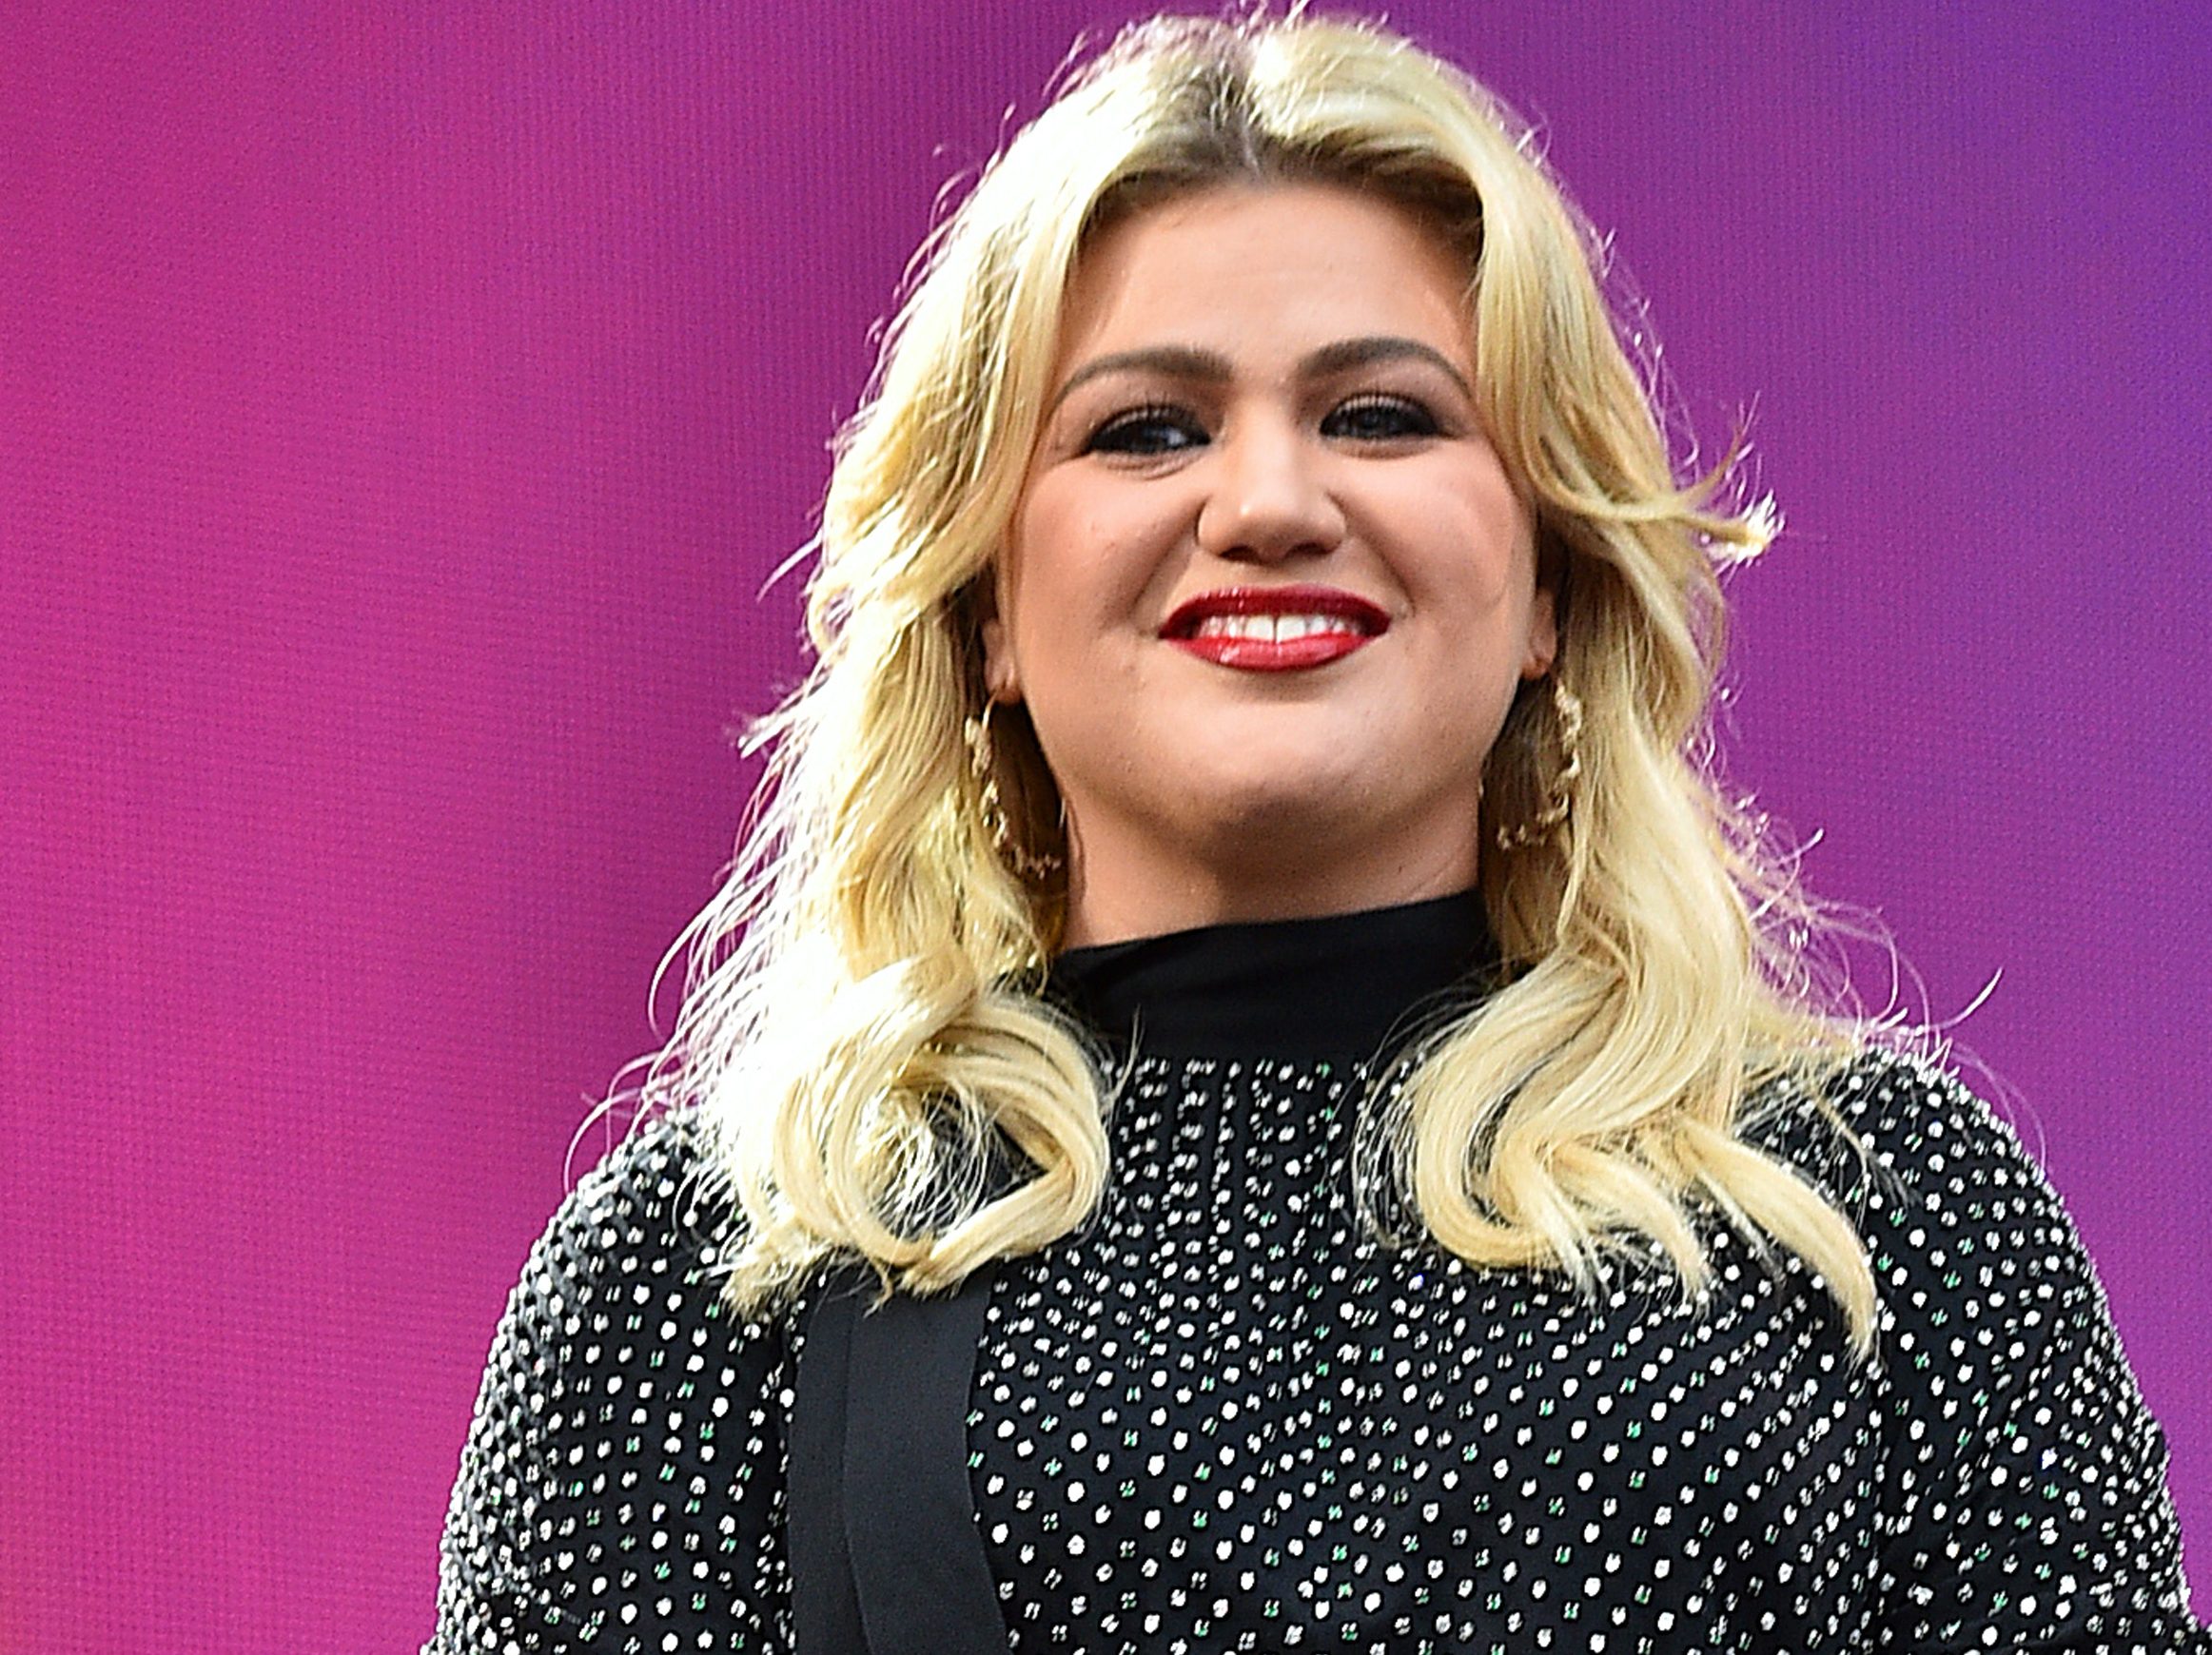 'IT'S NOT WEIRD': Kelly Clarkson reveals she has sex every night before bed - torontosun.com